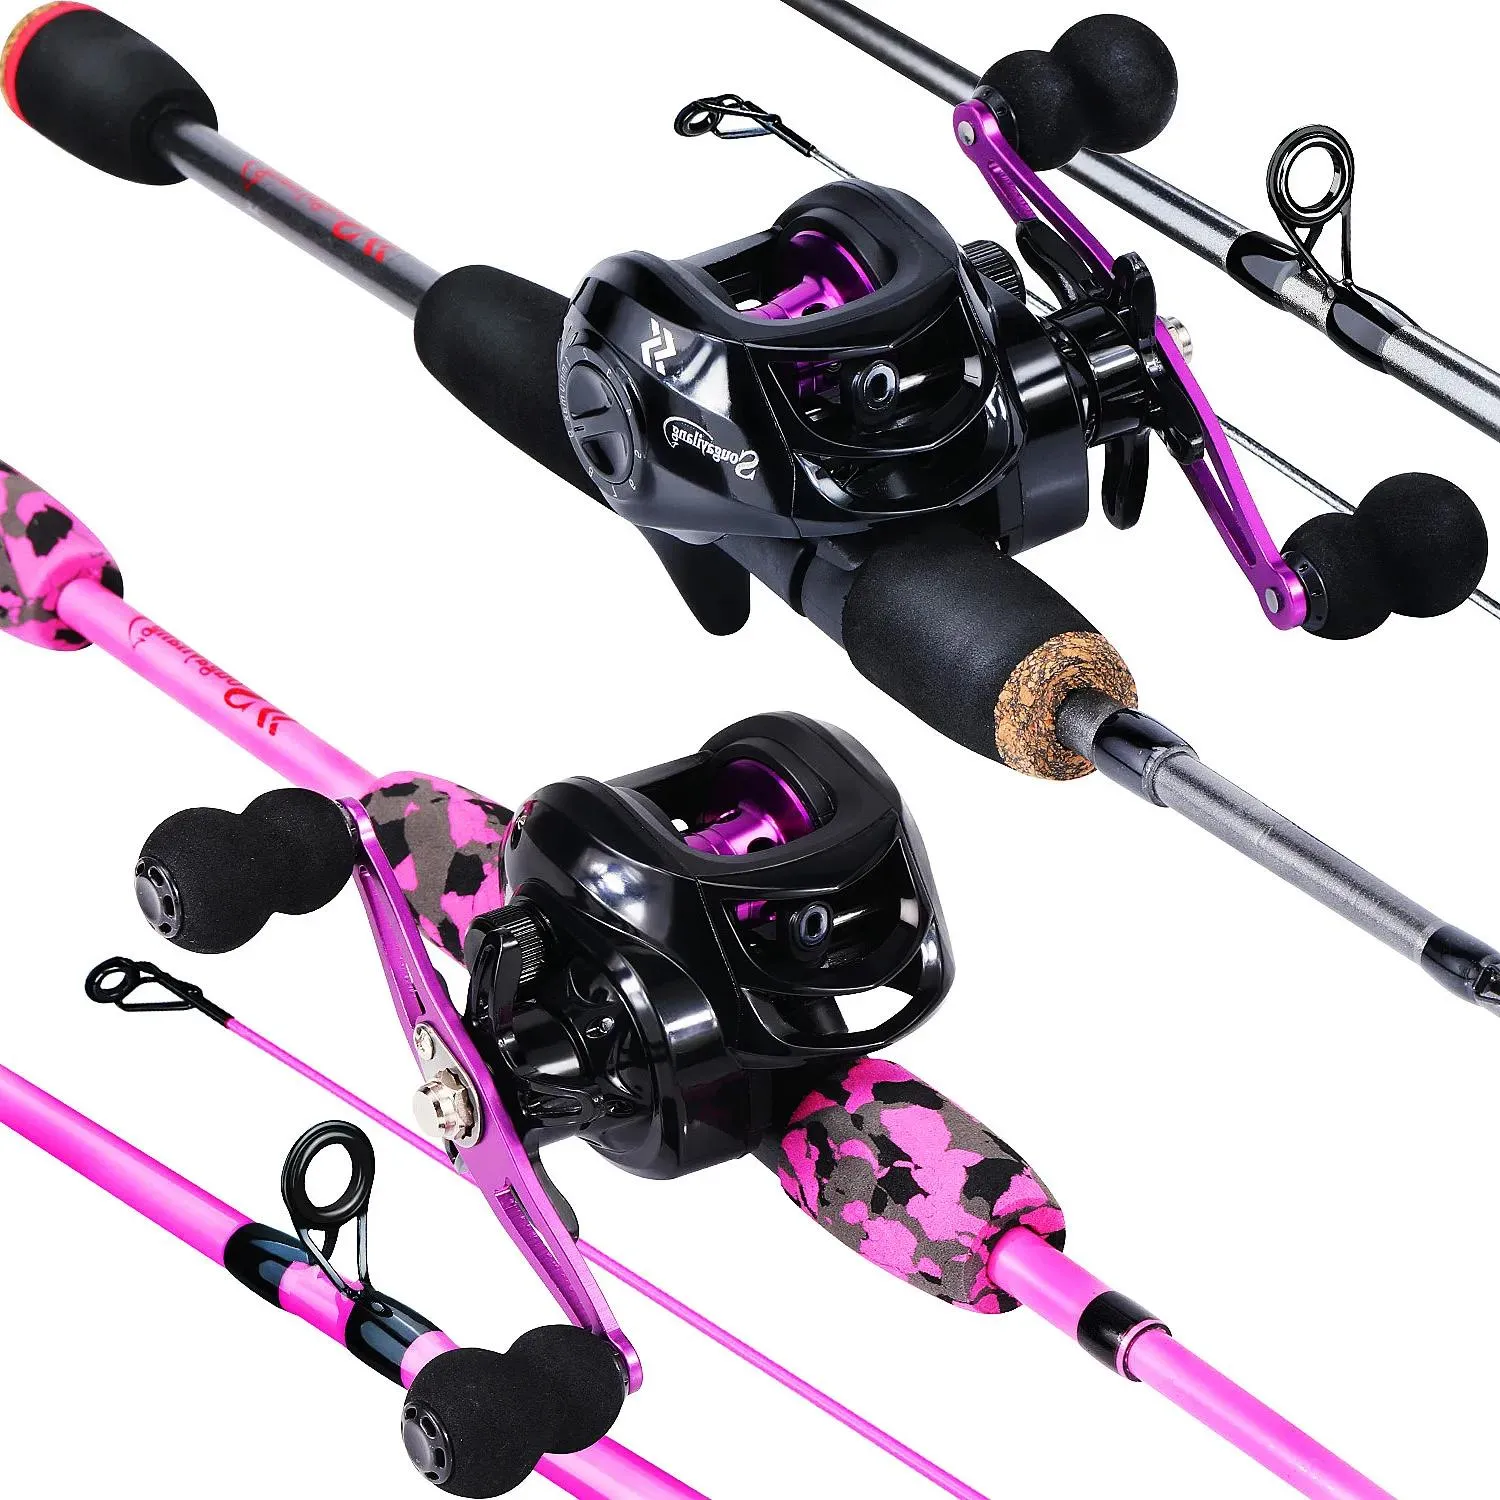 Combo Sougayilang Casting Fishing Rod Combo 7.2:1 High Speed Gear Ratio  Casting Reel For Freshwater Fishing Fishing Kit Fishing Set From 23,78 €